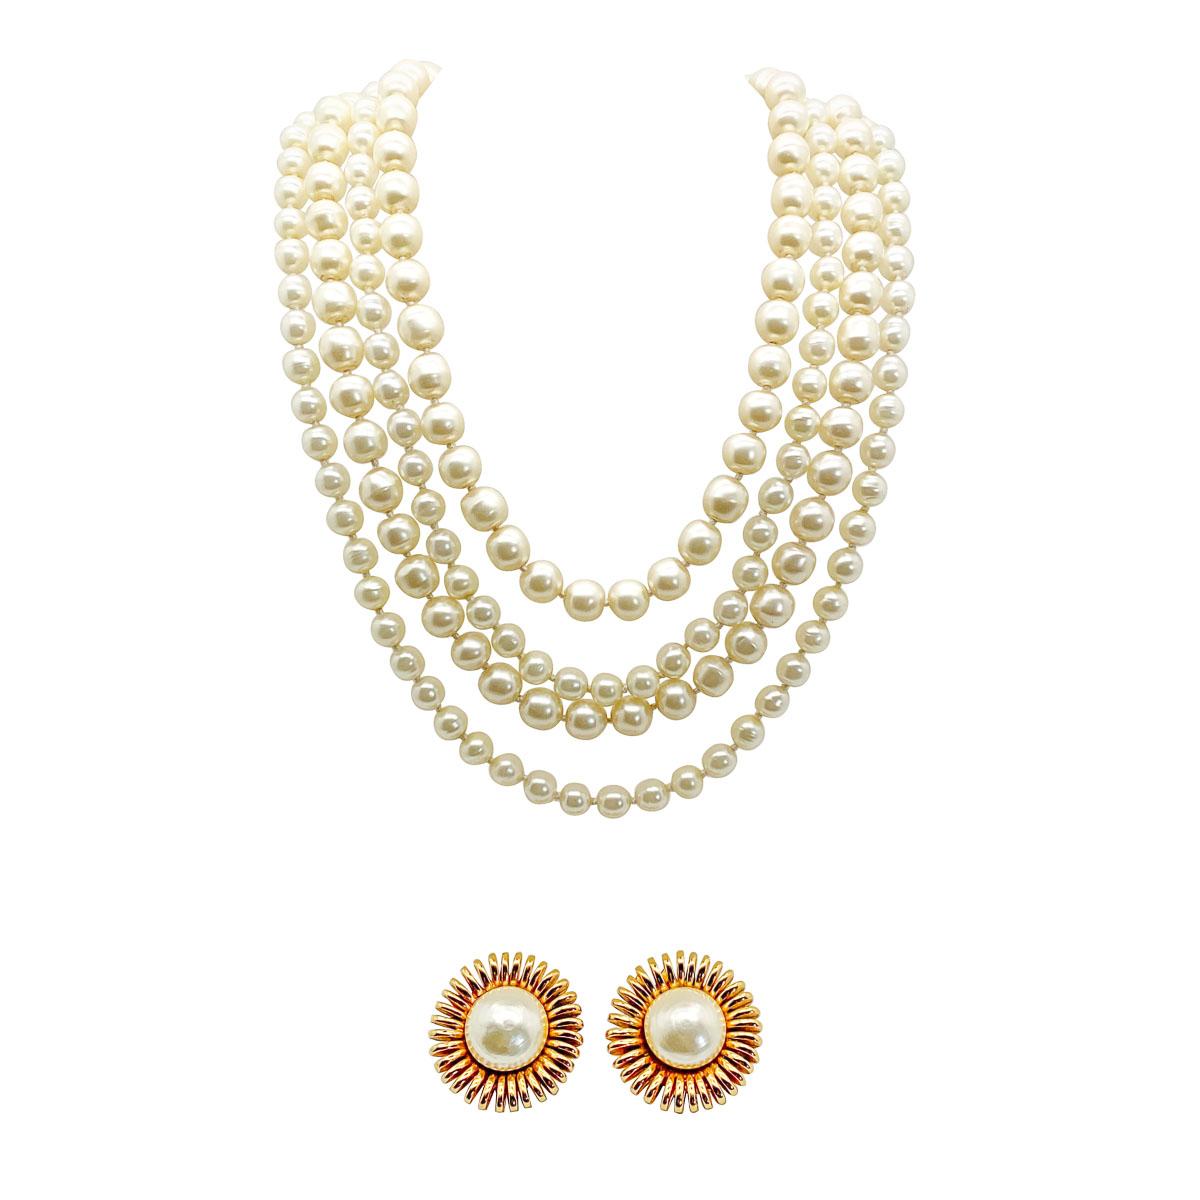 An important and highly desirable vintage chanel pearl necklace and earring suite. Attributed to Maison Gripoix for the House of Chanel and to the first year of the now legendary Karl Lagerfeld at the House.
Beginning with the impressive torsade